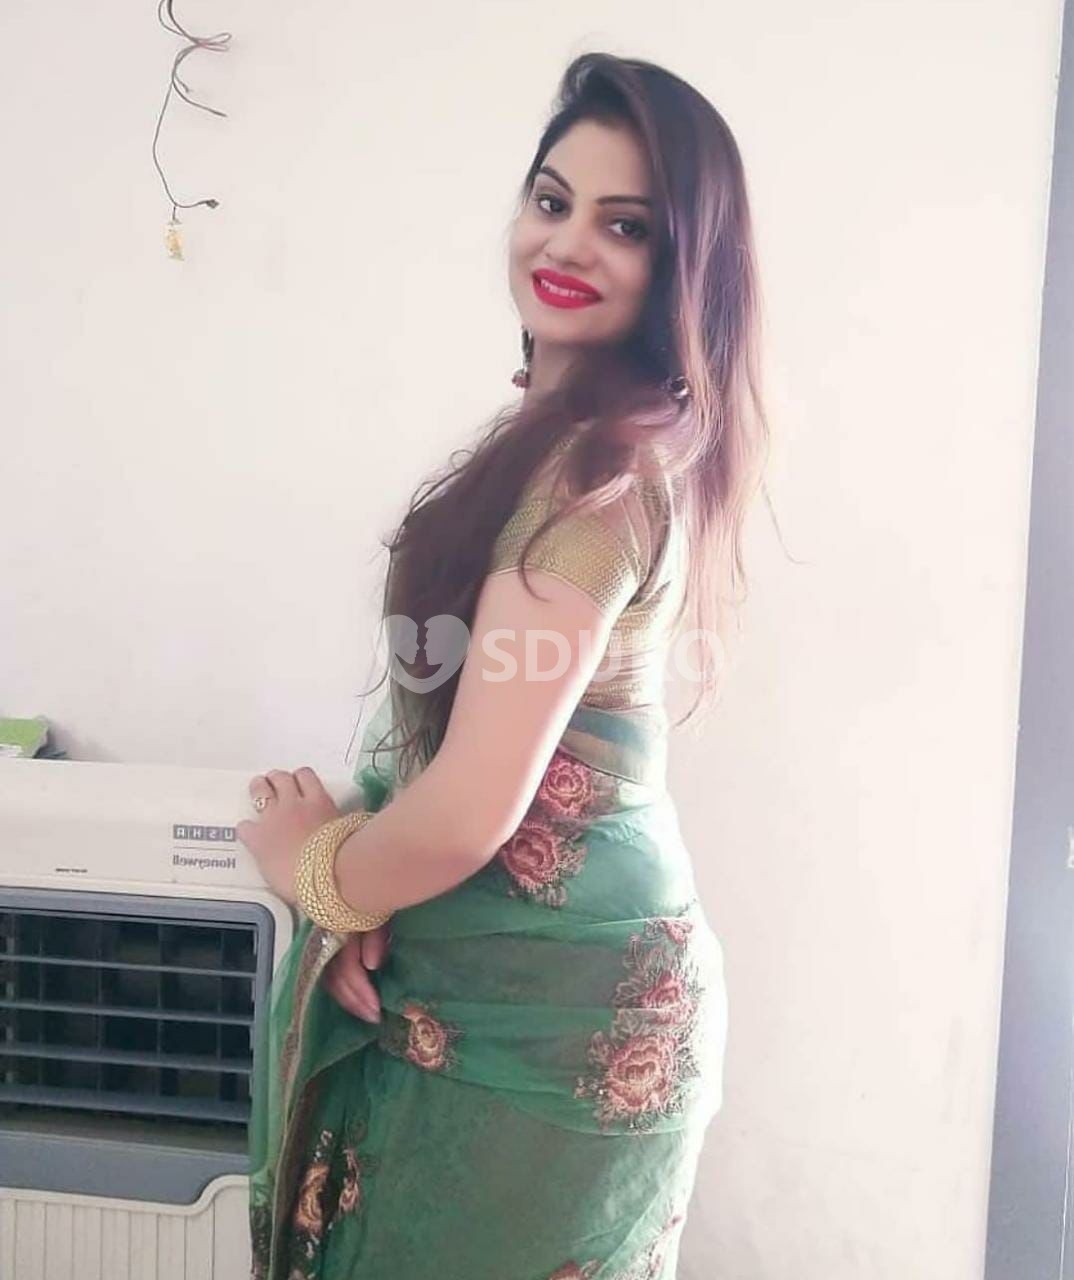 Faridabad myself Mallika.TODAY LOW PRICE 100% SAFE AND SECURE GENUINE CALL GIRL AFFORDABLE PRICE CALL NOW..